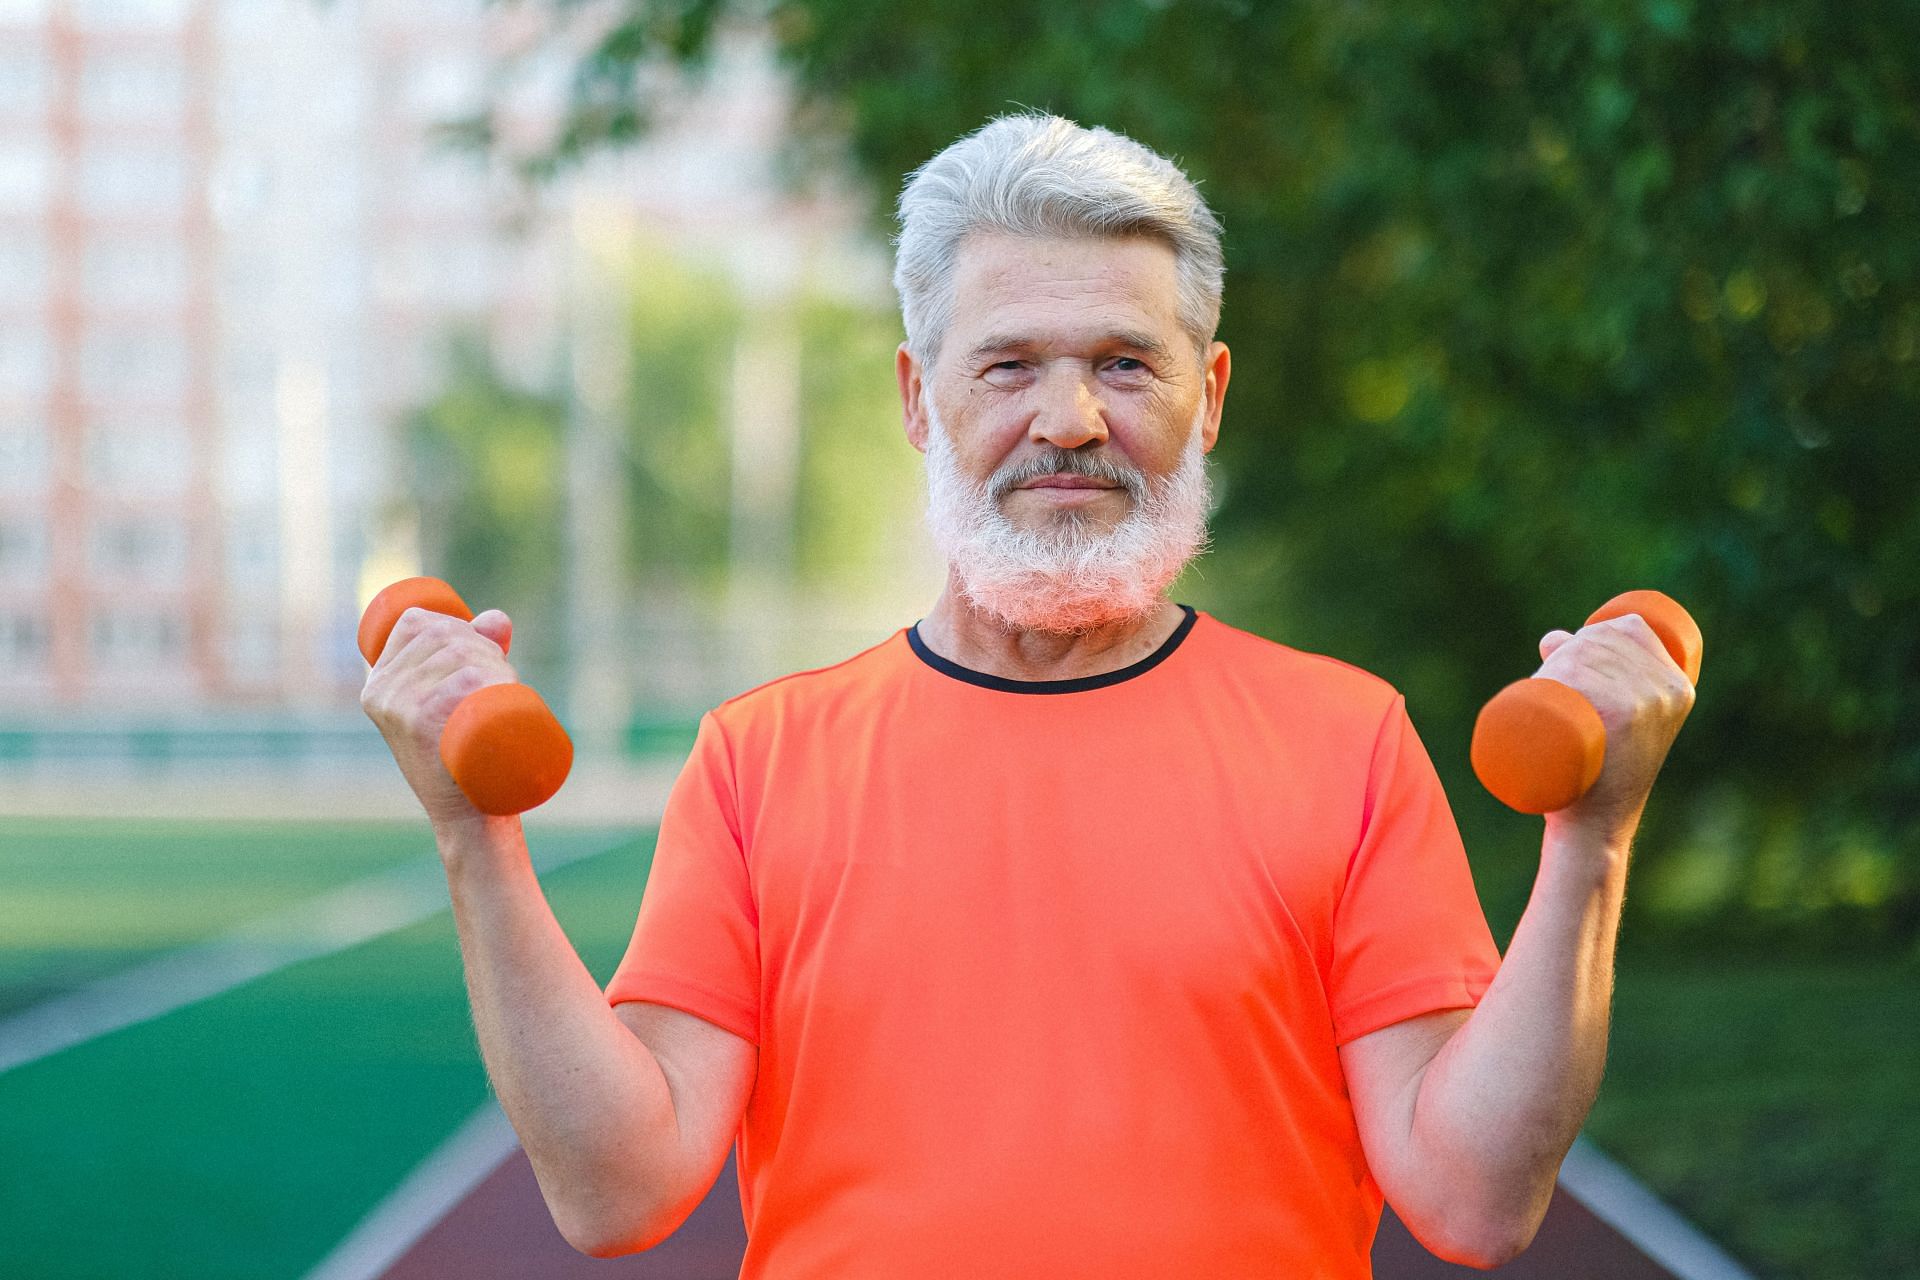 At-home dumbbell exercises are a simple and convenient way for seniors to build muscle (Image via Pexels @Anna Shvets)